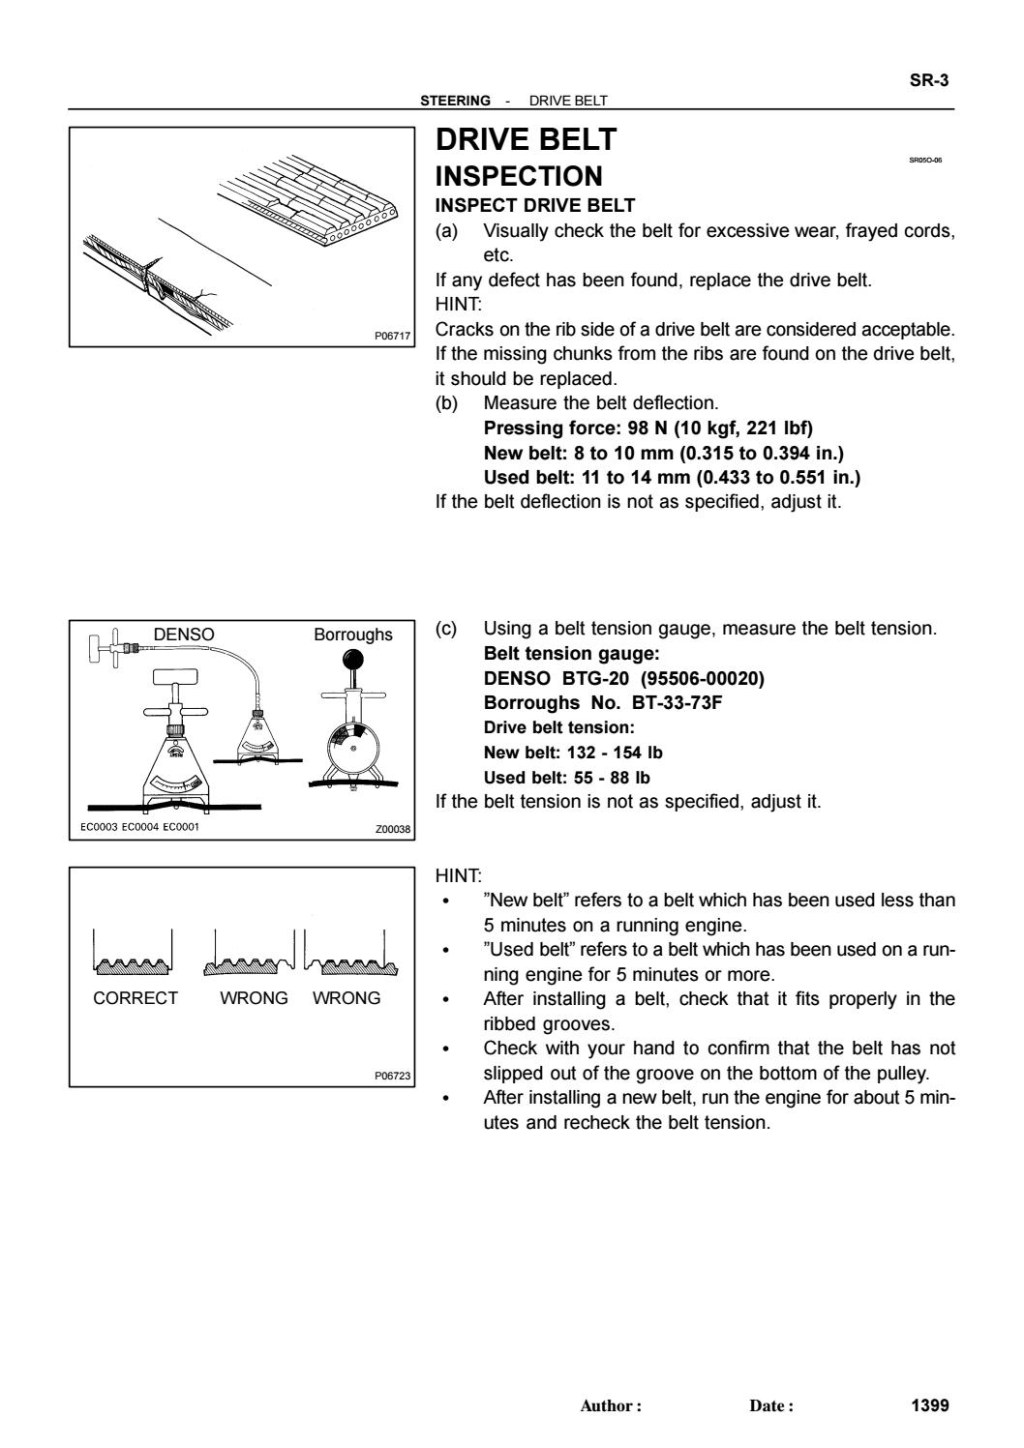 Picture of: Toyota Sienna Service Repair Manual by  – Issuu